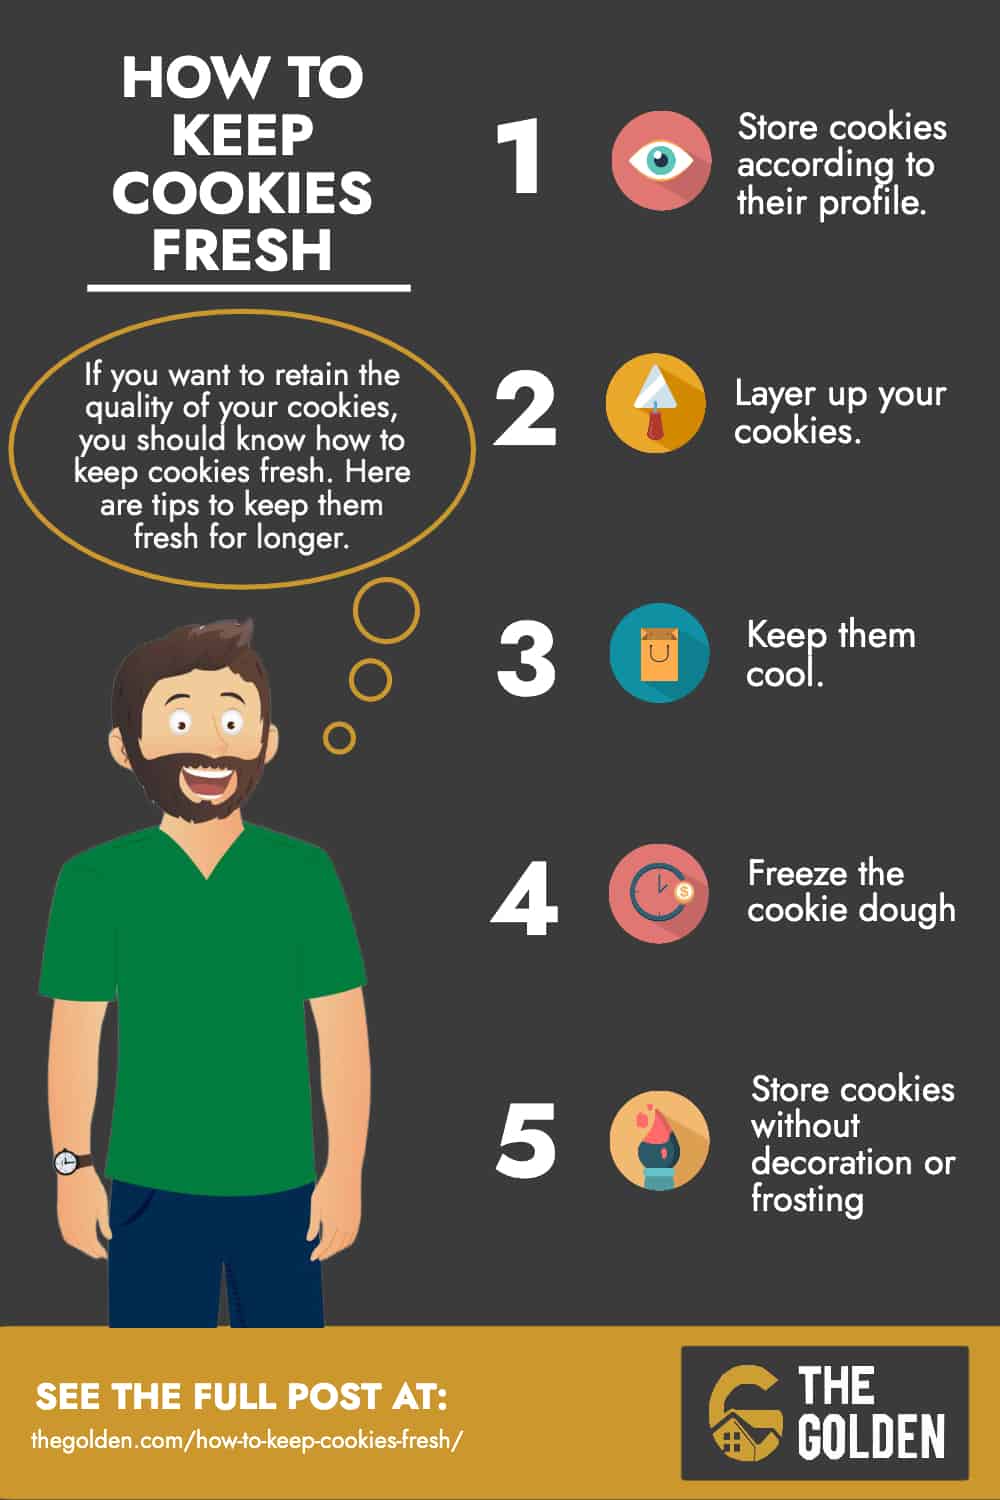 How To Keep Cookies Fresh - Infographic